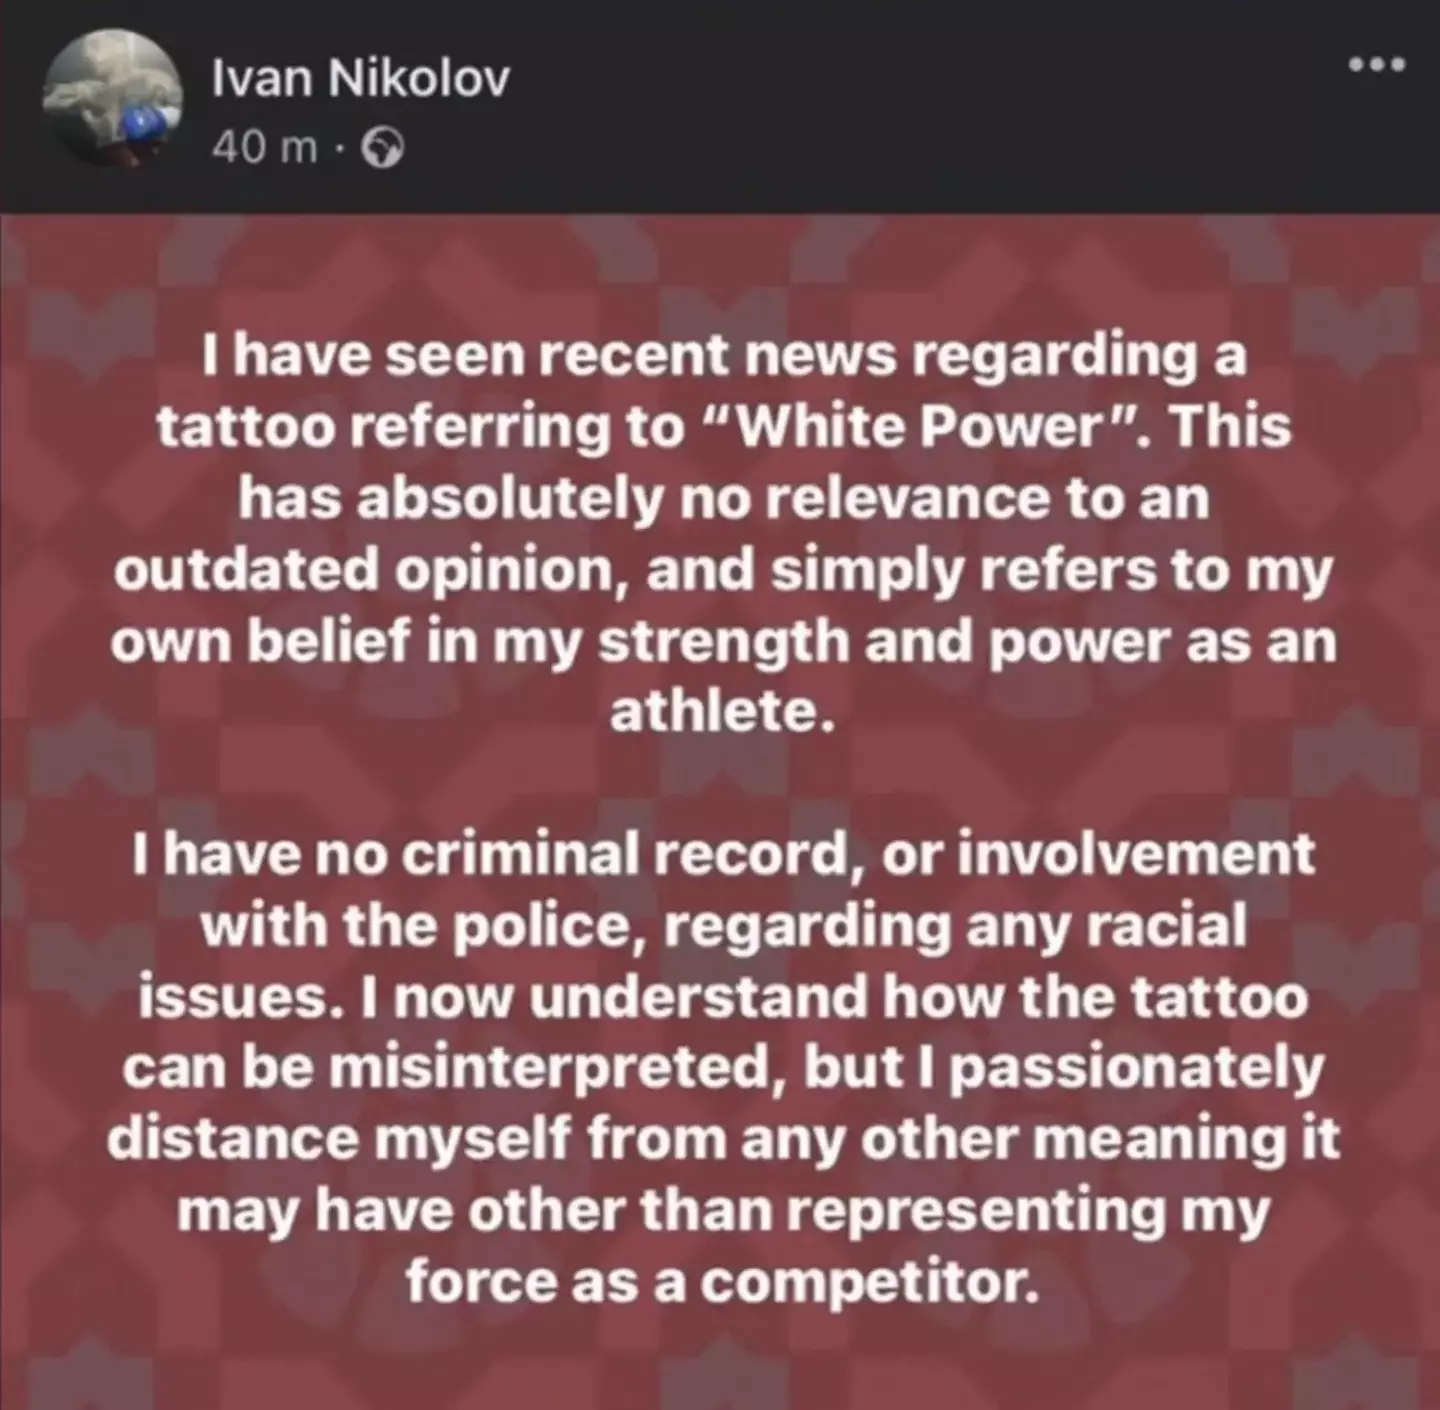 Ivan Nikolov denying racism, which has since been deleted.